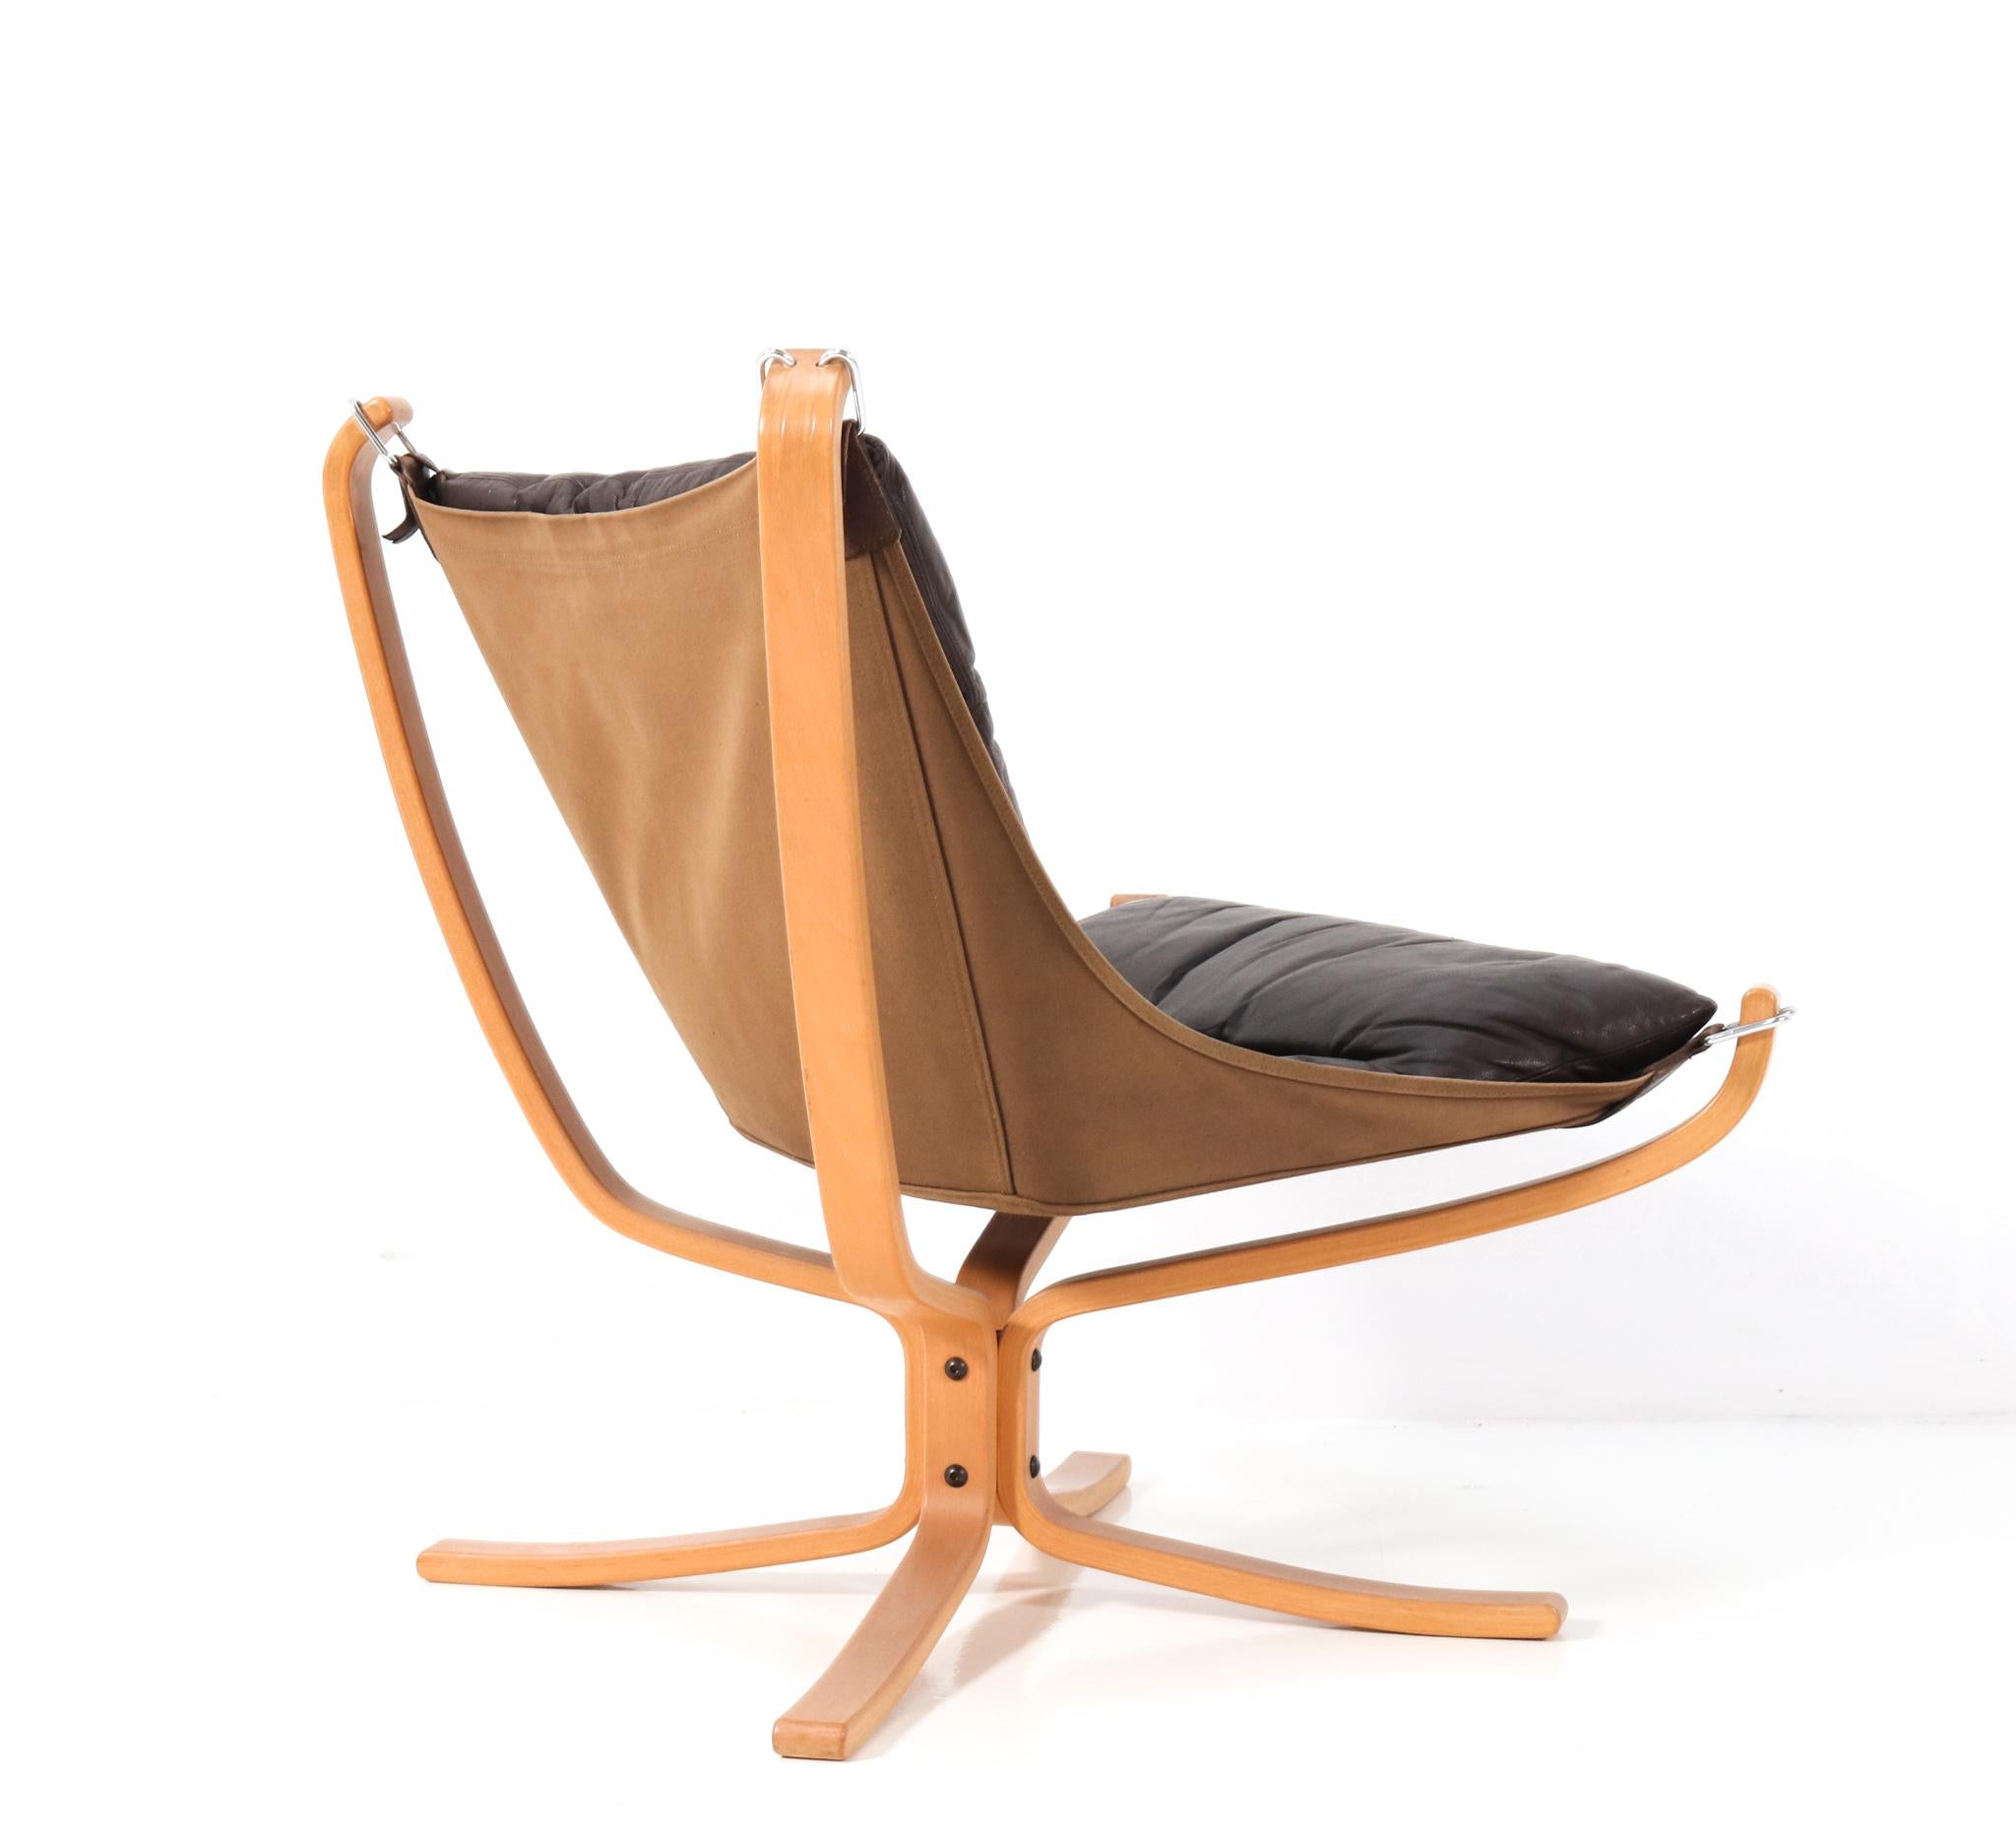 Late 20th Century Mid-Century Modern Falcon Lounge Chair by Sigurd Ressell for Vatne Møbler